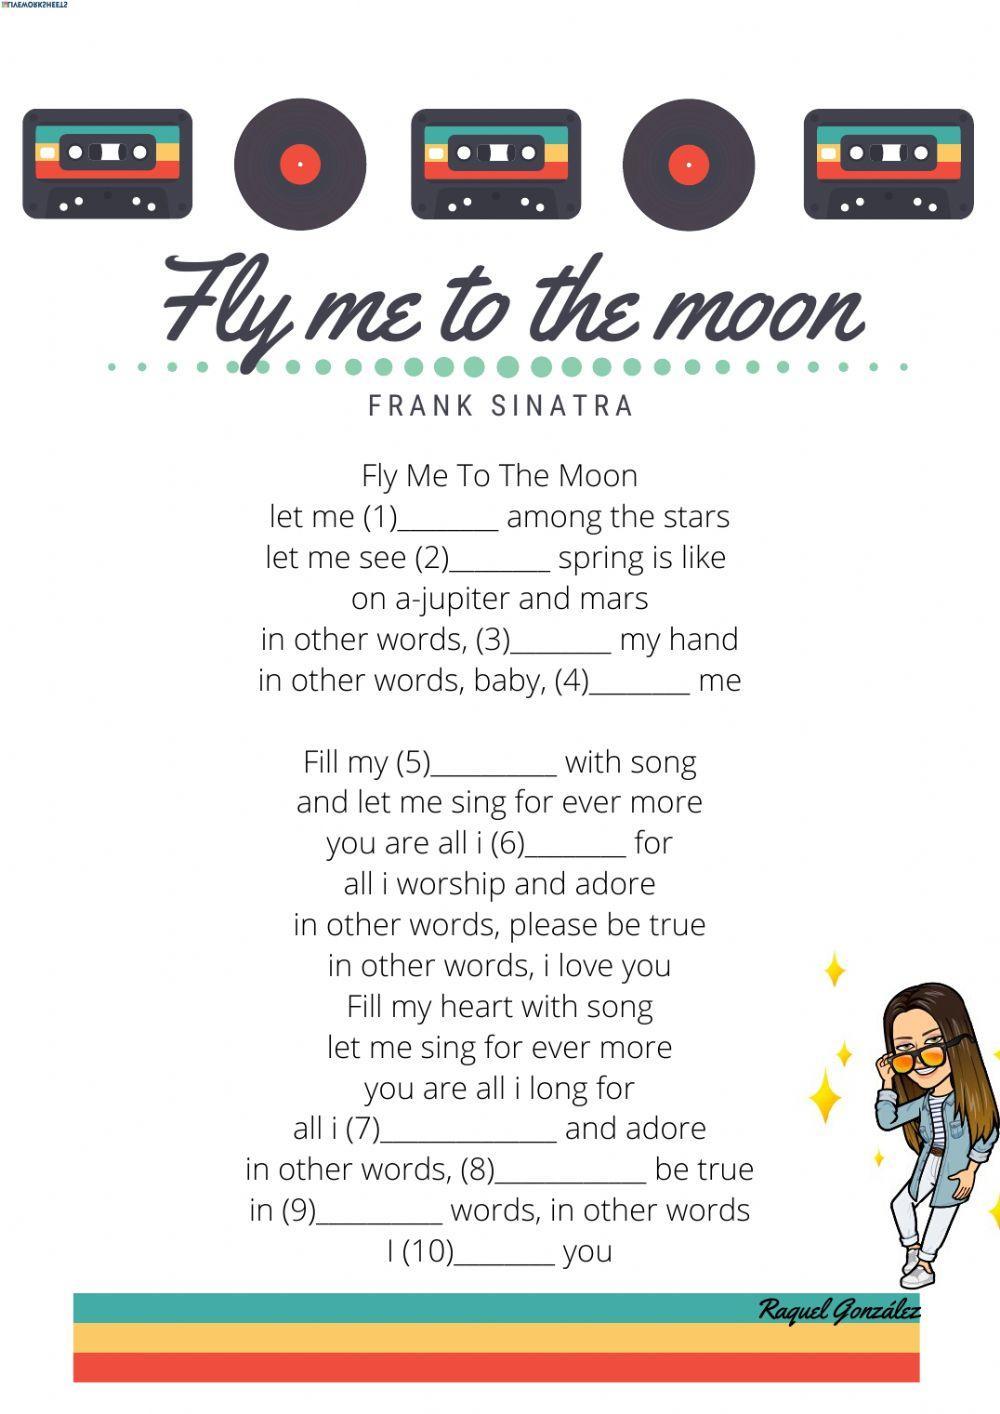 Fly me to the moon- Frank Sinatra